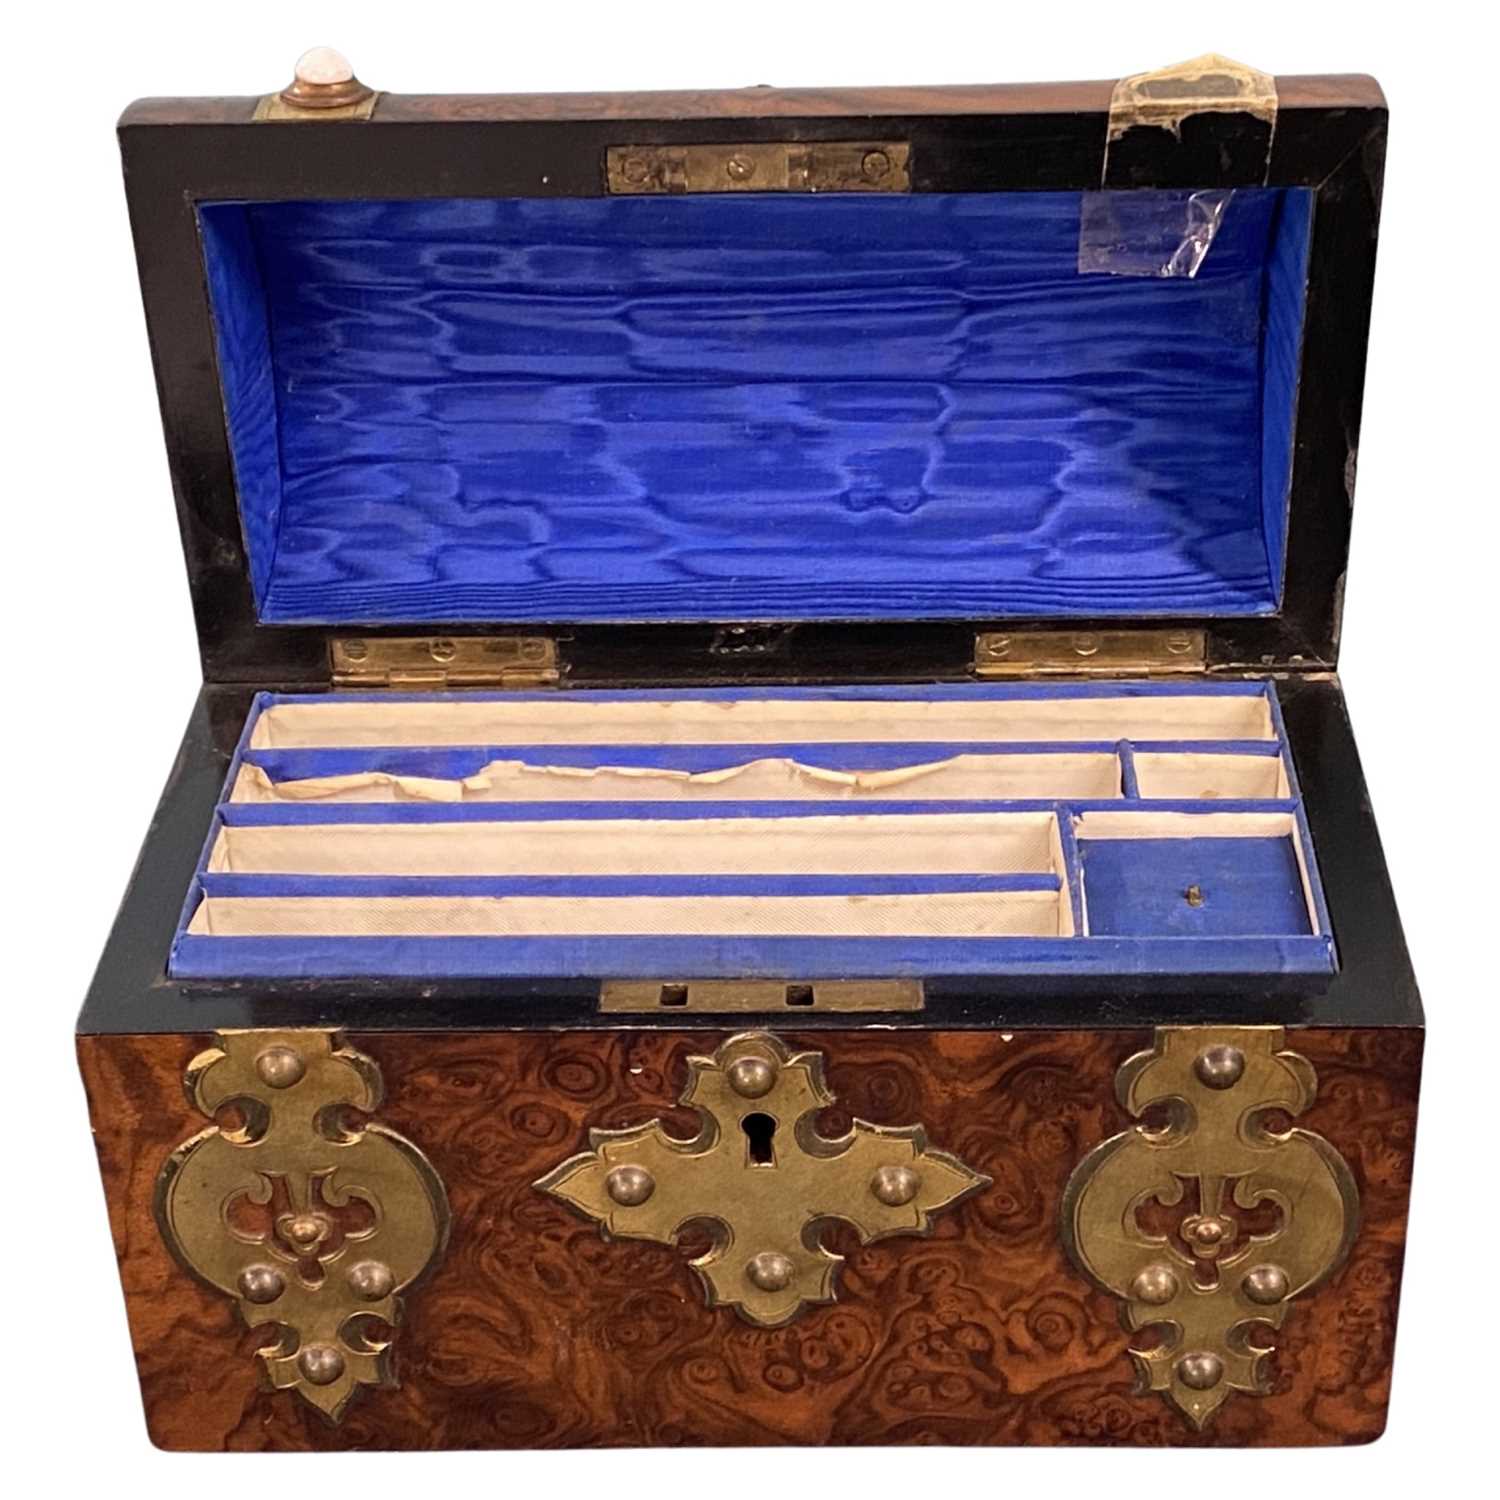 Late 19th Century wooden stationery box with domed cover and inlaid brass decoration, 20cm long - Image 2 of 2